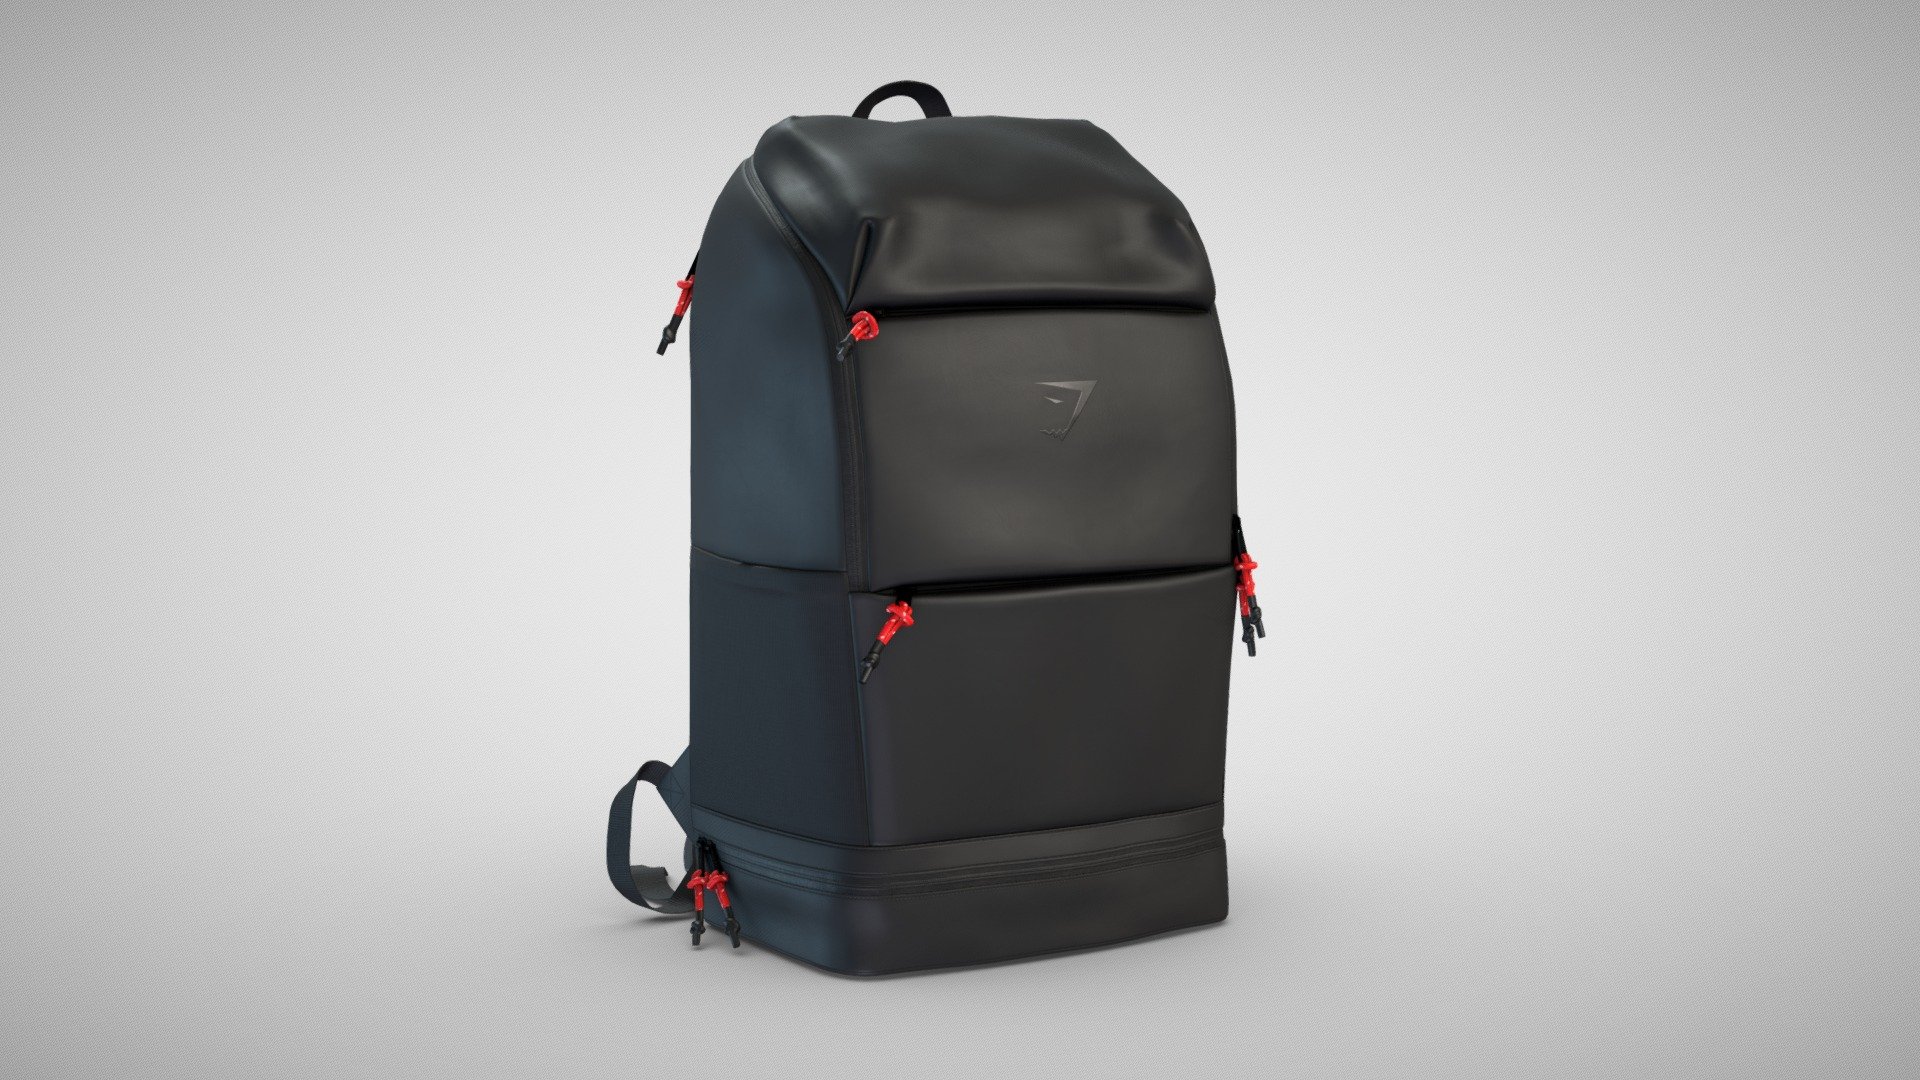 Created for spase.io - Sleek Backpack - 3D model by Mikhail Kadilnikov (@MikhailKadilnikov) 3d model